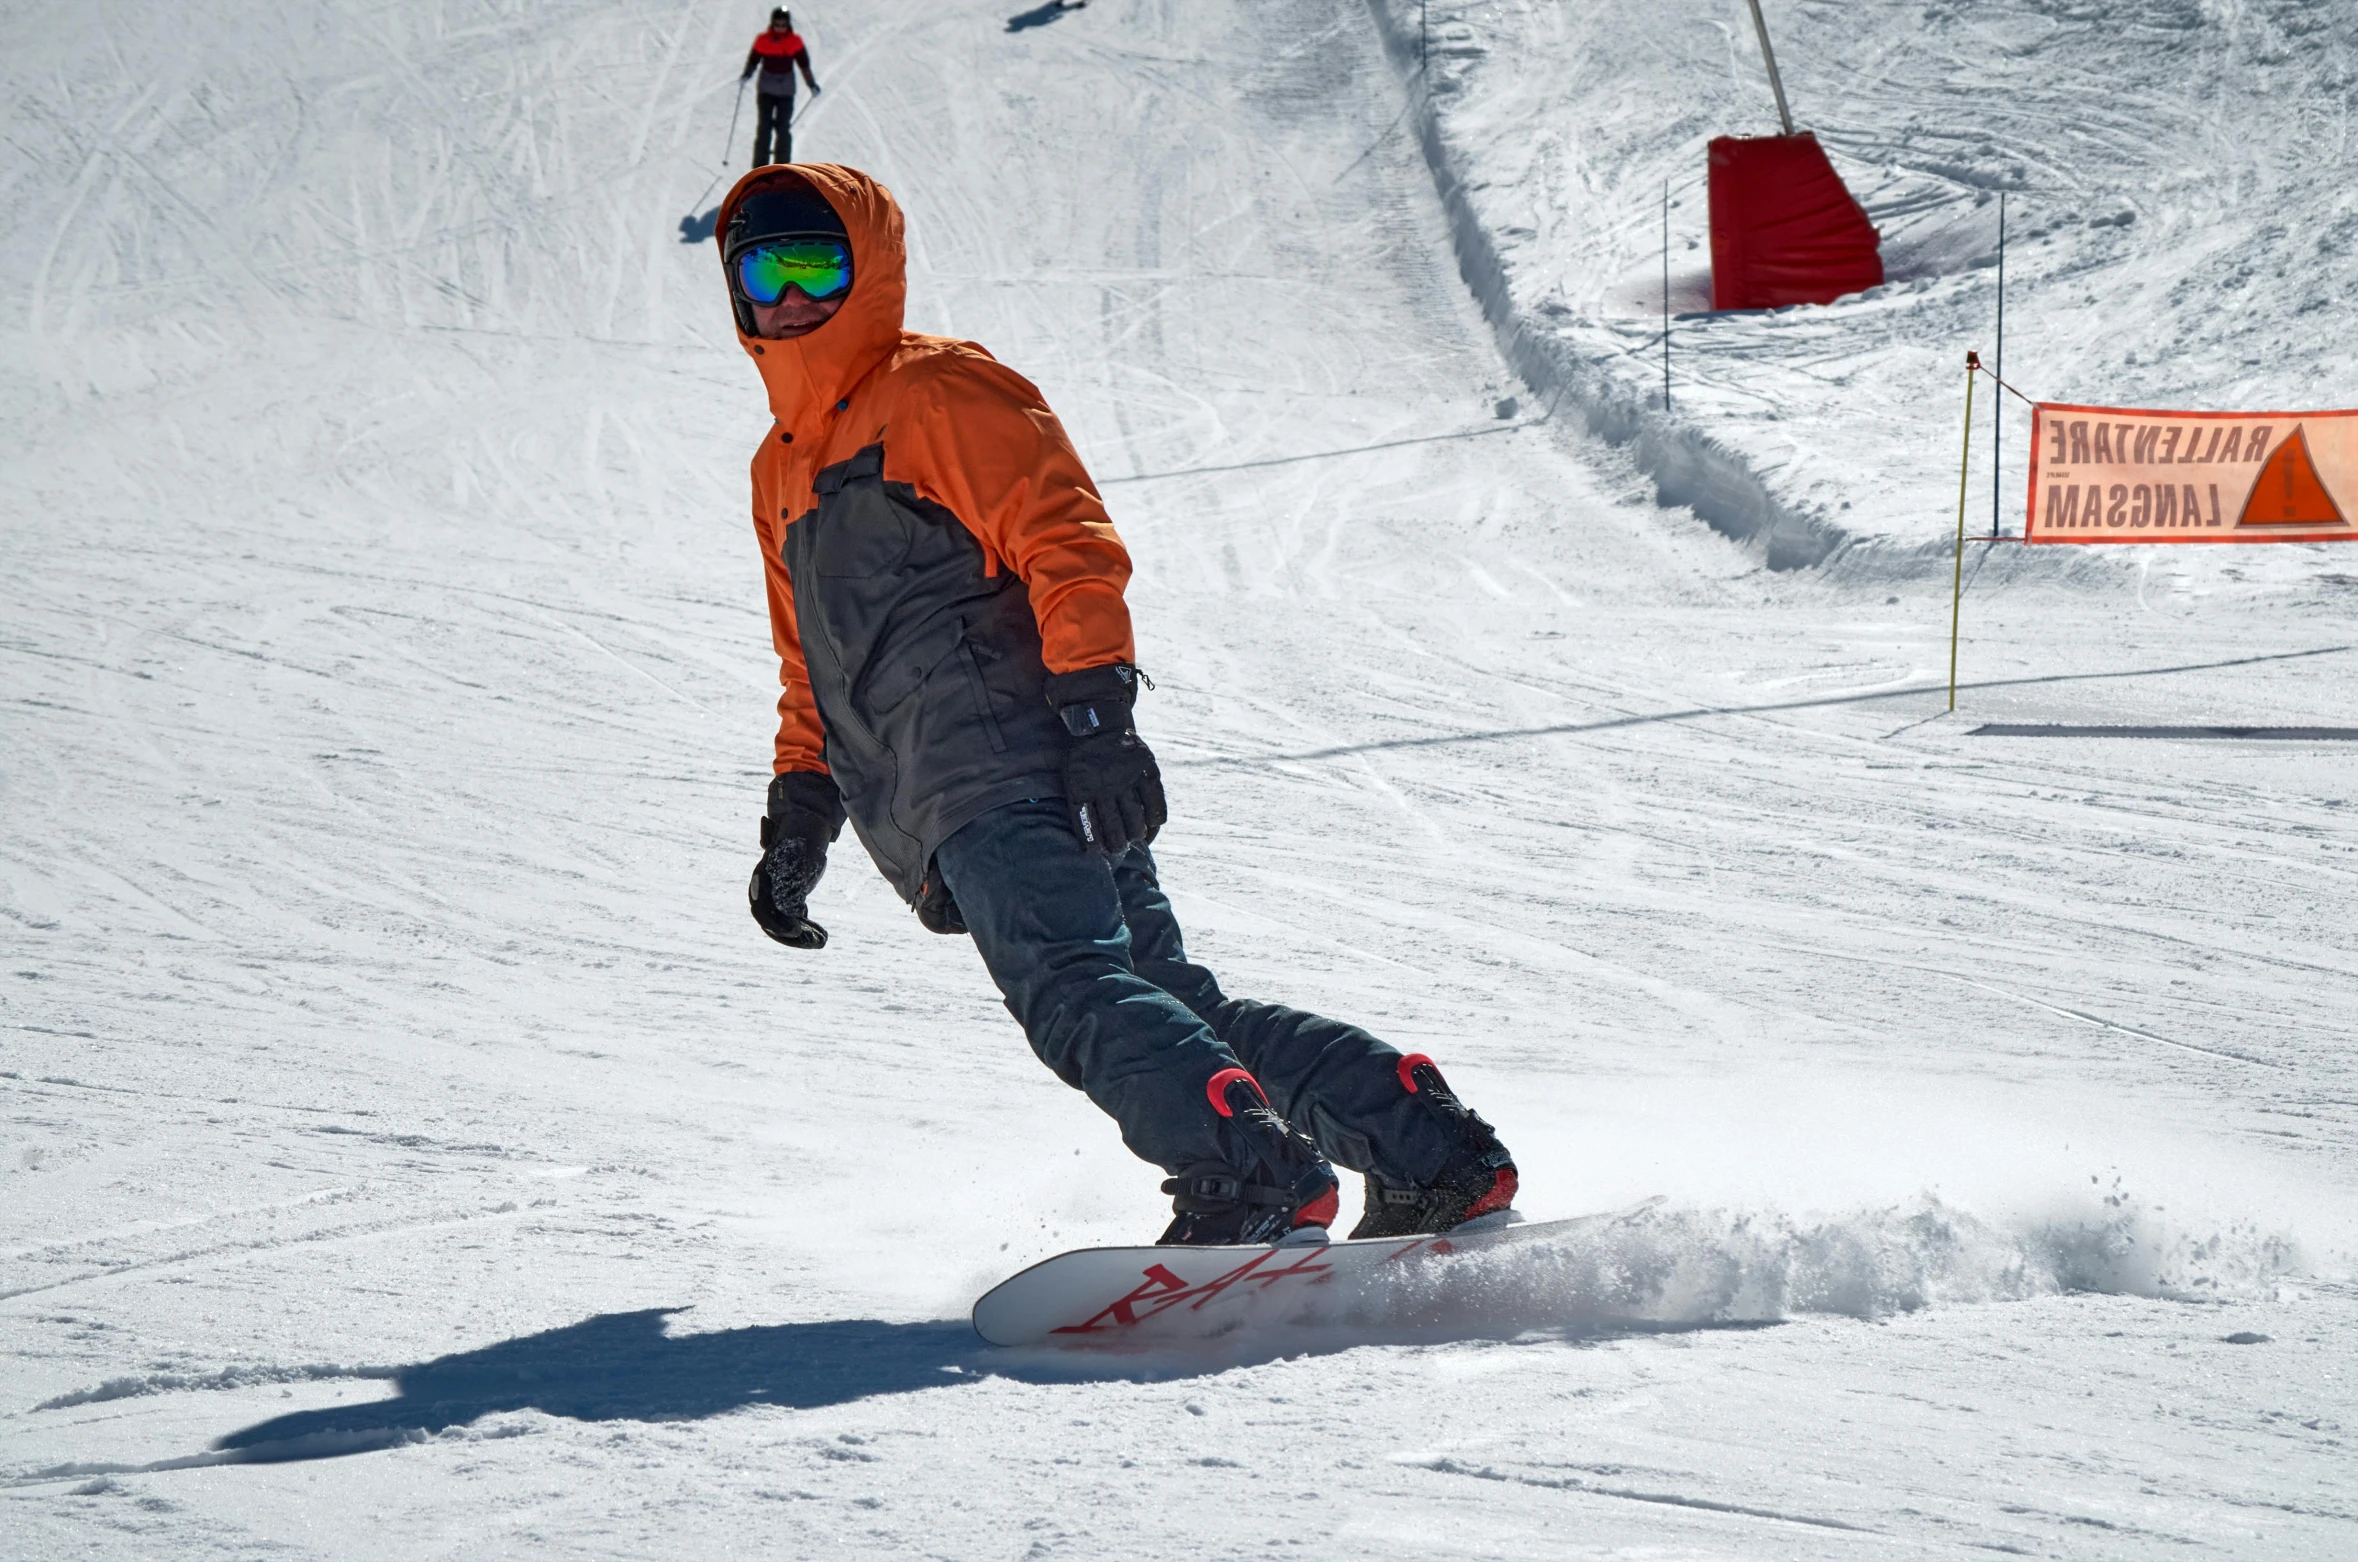 a man riding a snowboard down a snow covered slope, orange balaclava, avatar image, no cropping, taken with sony alpha 9